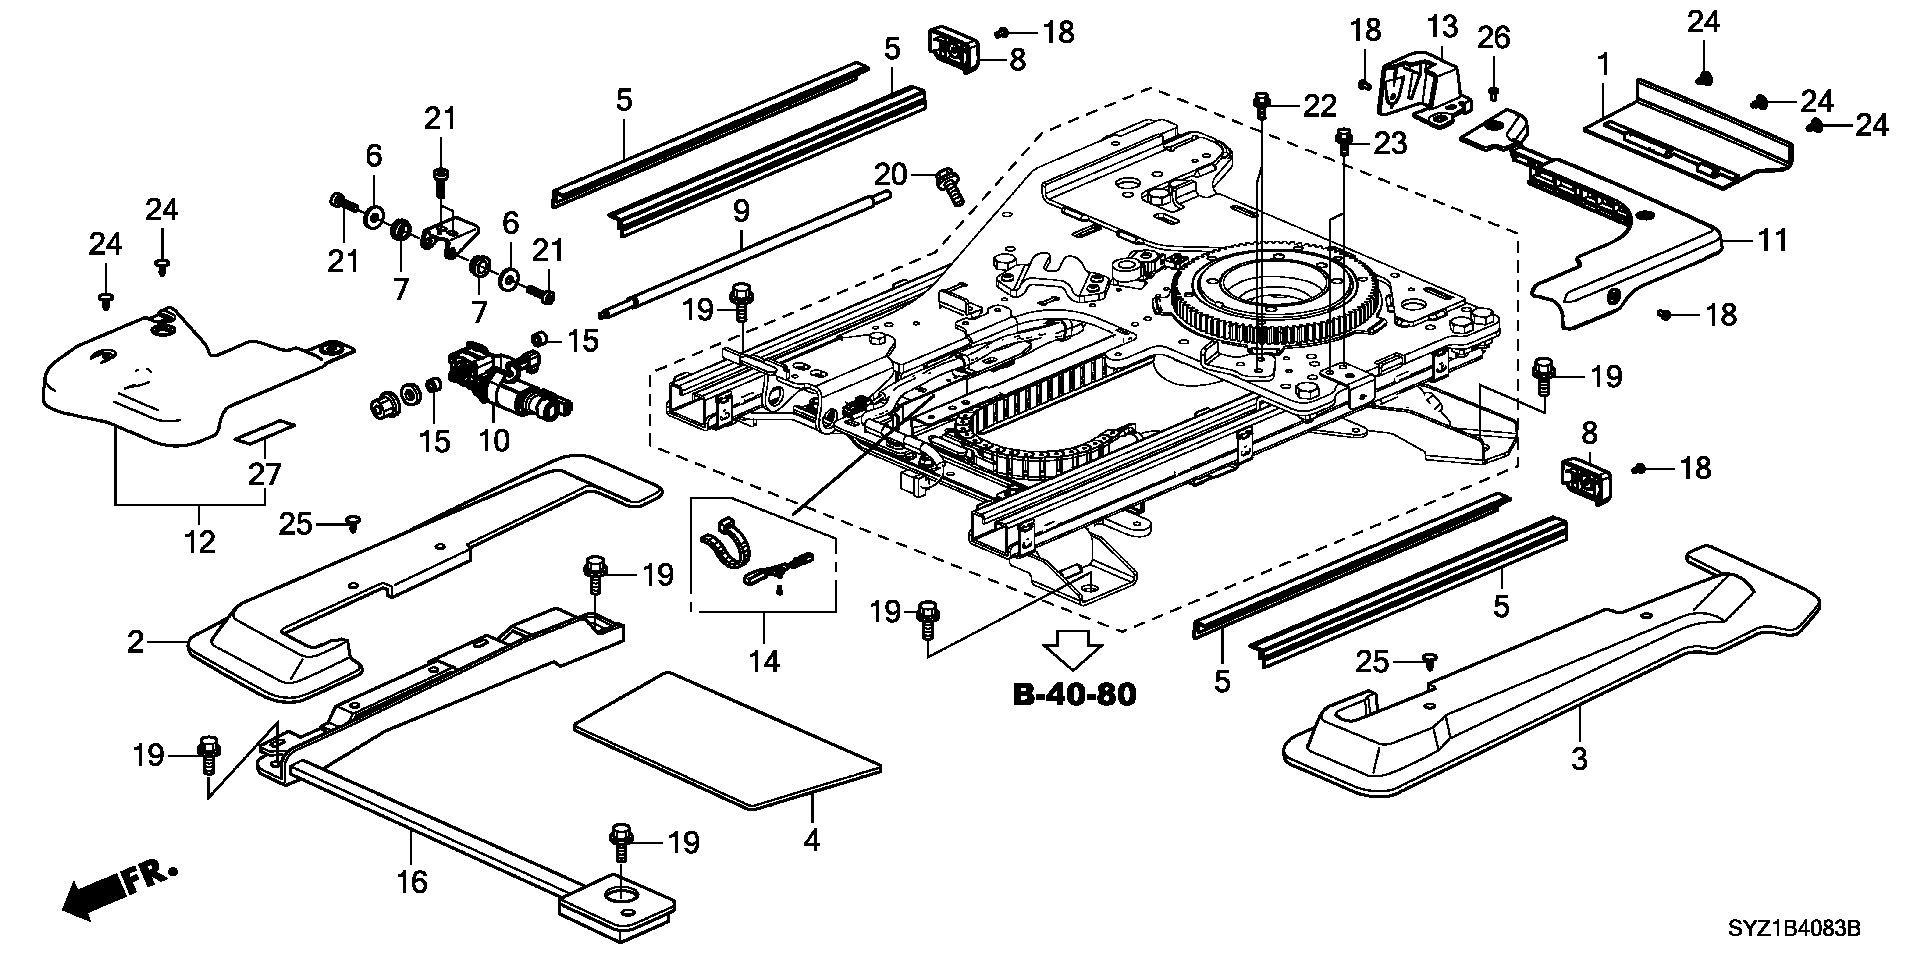 LIFTER  COMPONENT PARTS (3) ( SIDE LIFT UP SEAT)